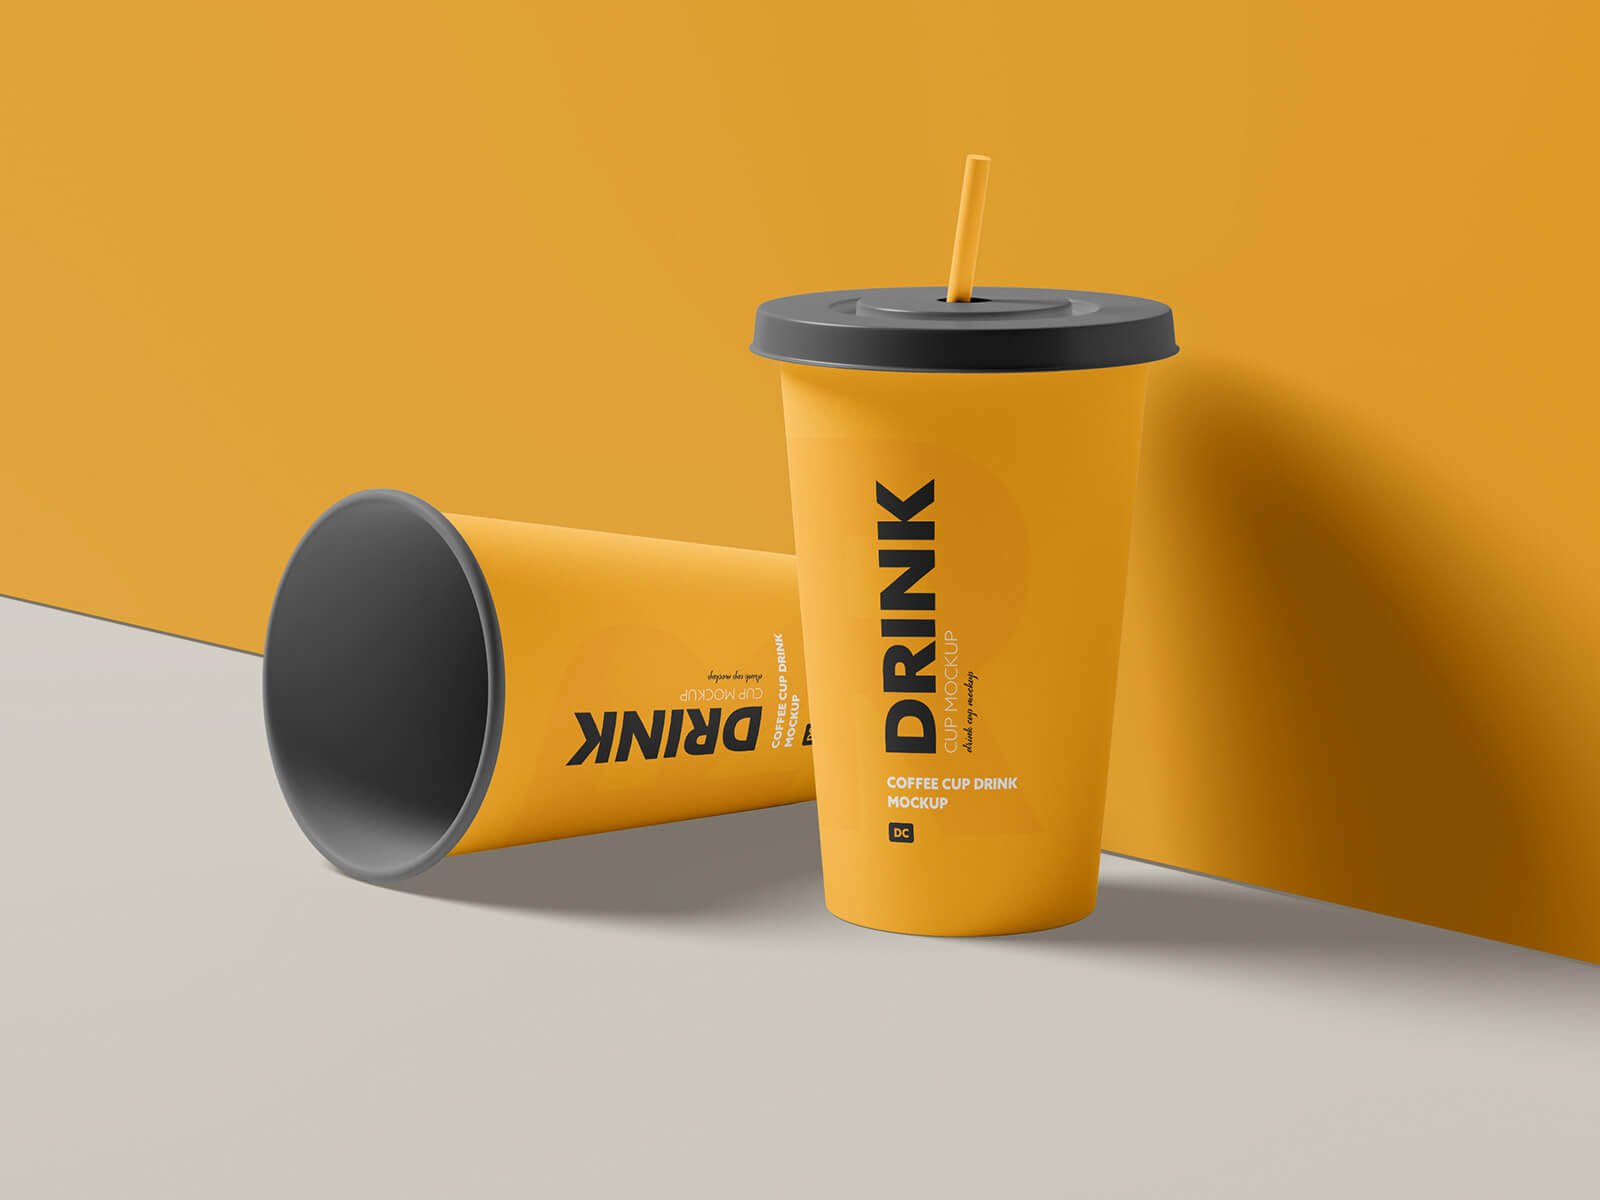 Free Juice Soda Drink Disposable Cup Mockup PSD